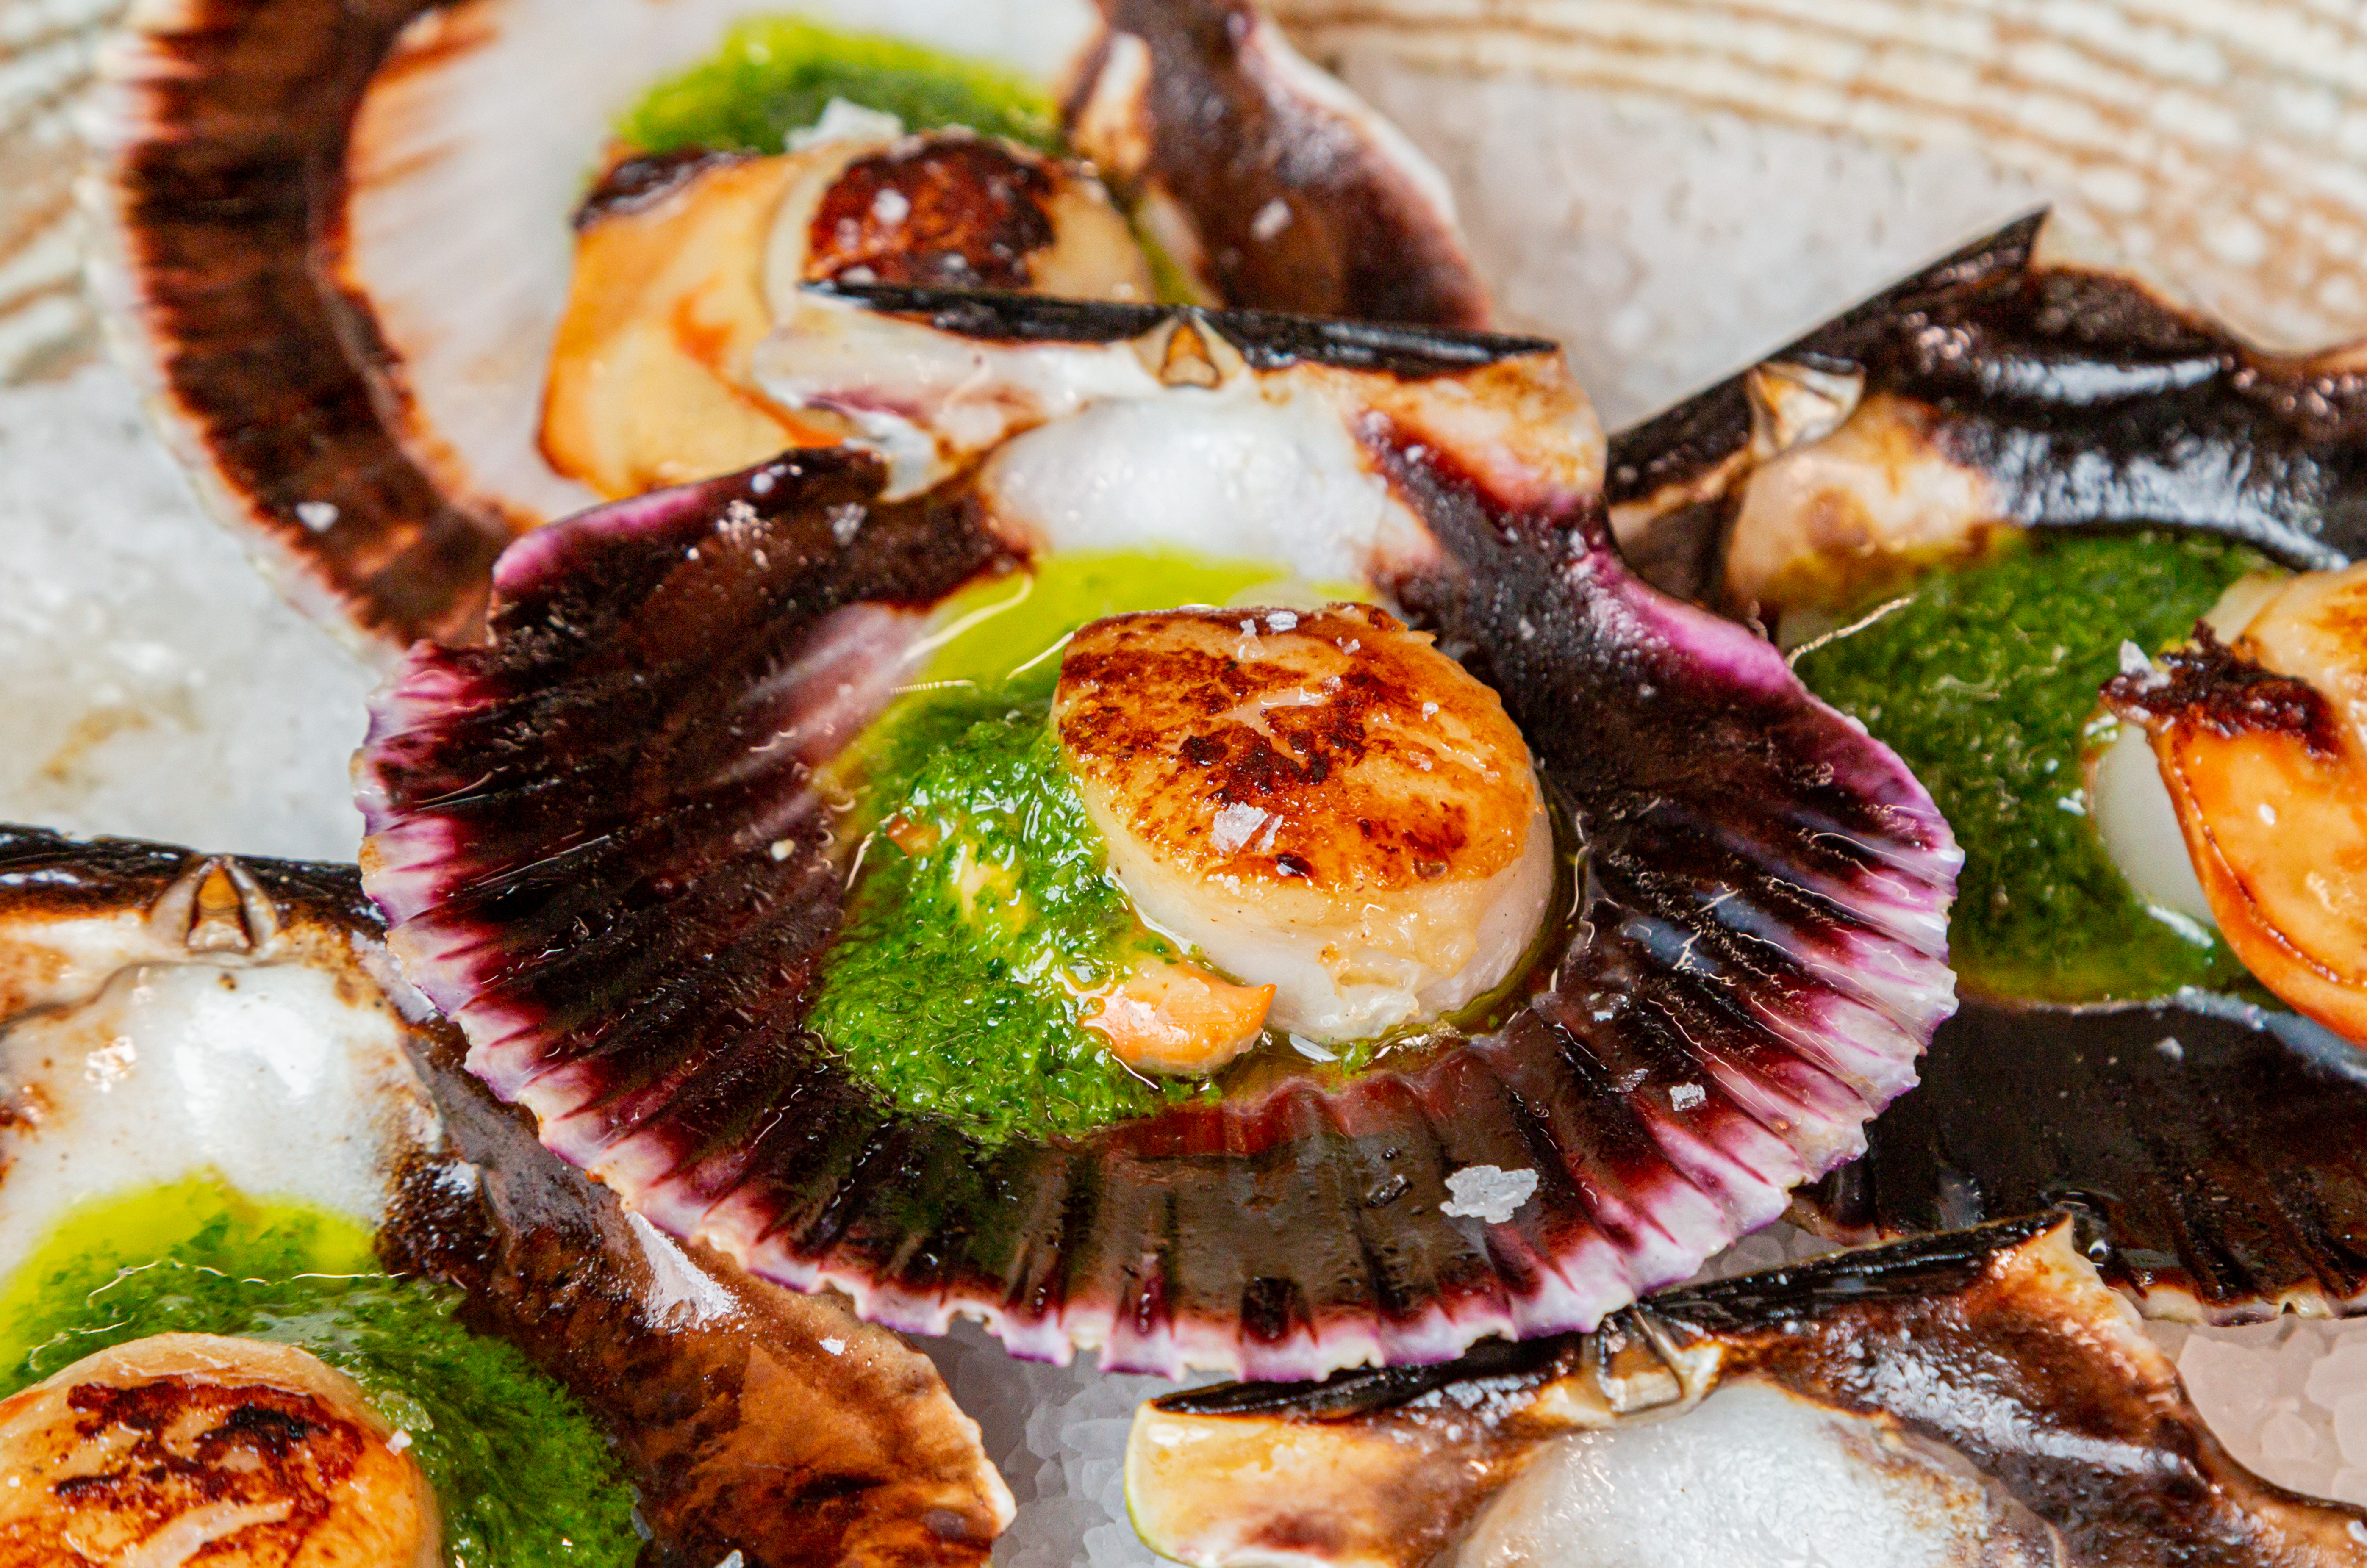 Grilled scallops with garlic